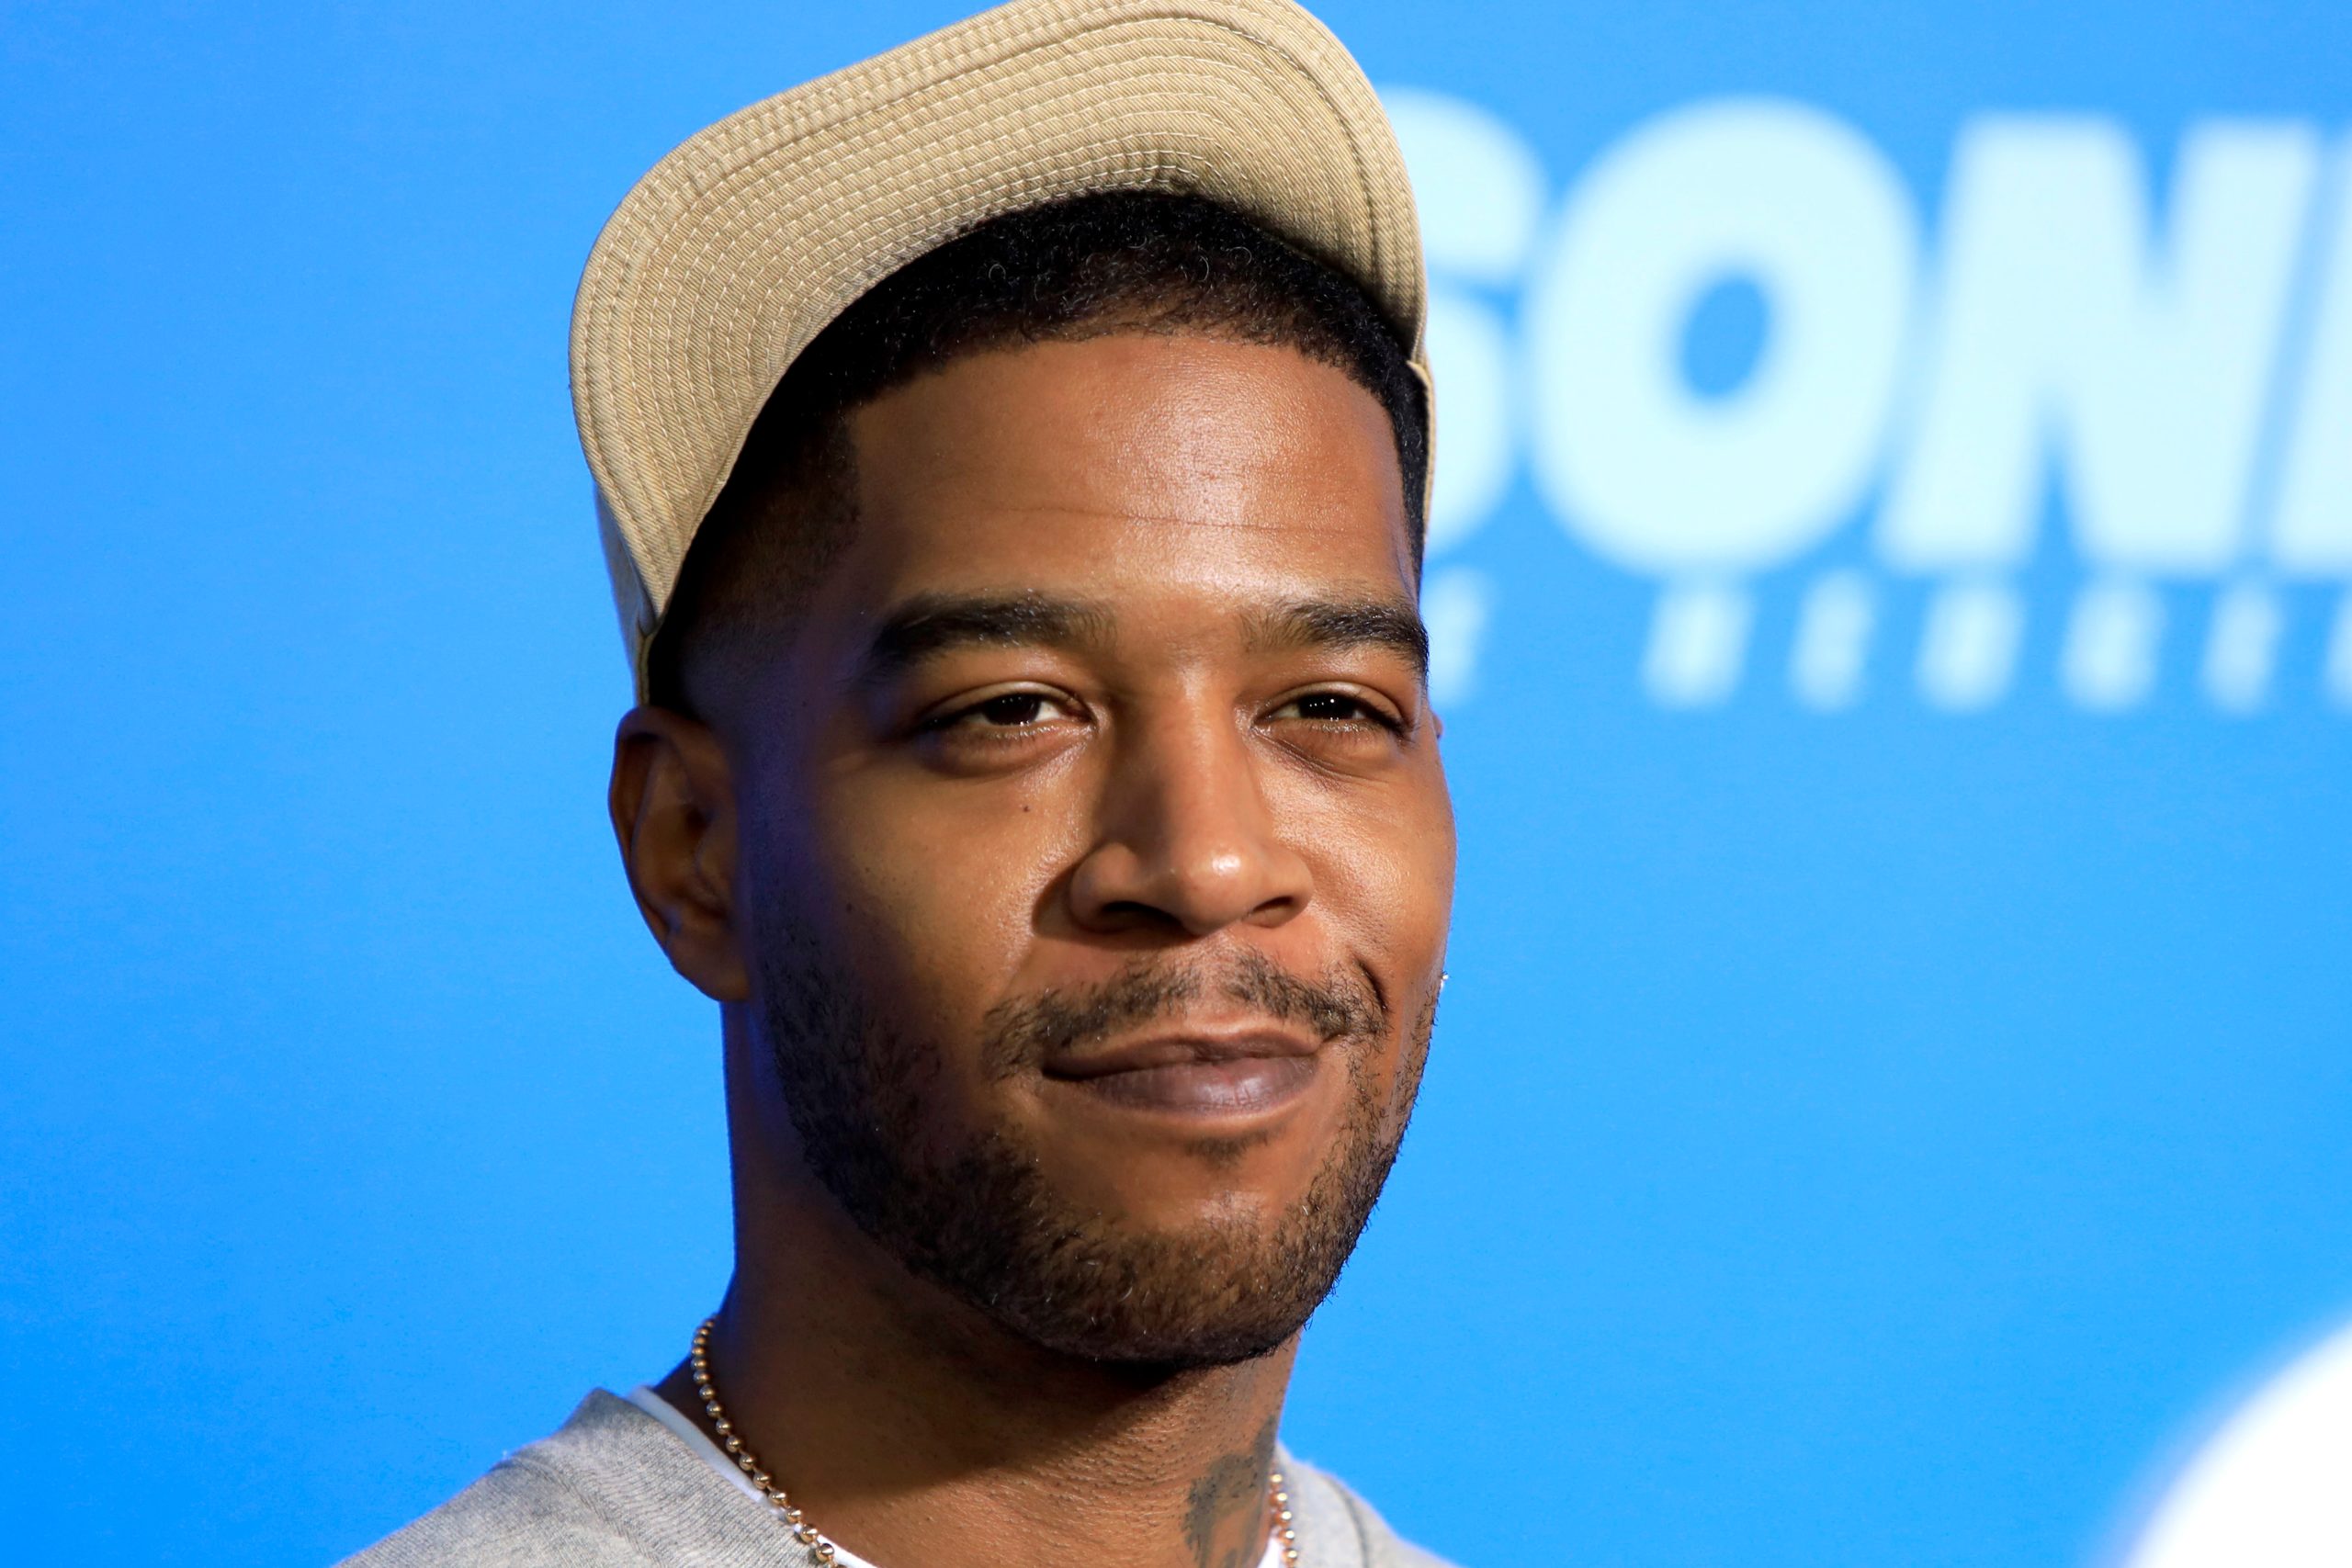 Kid Cudi: The Journey to the Tenth Album